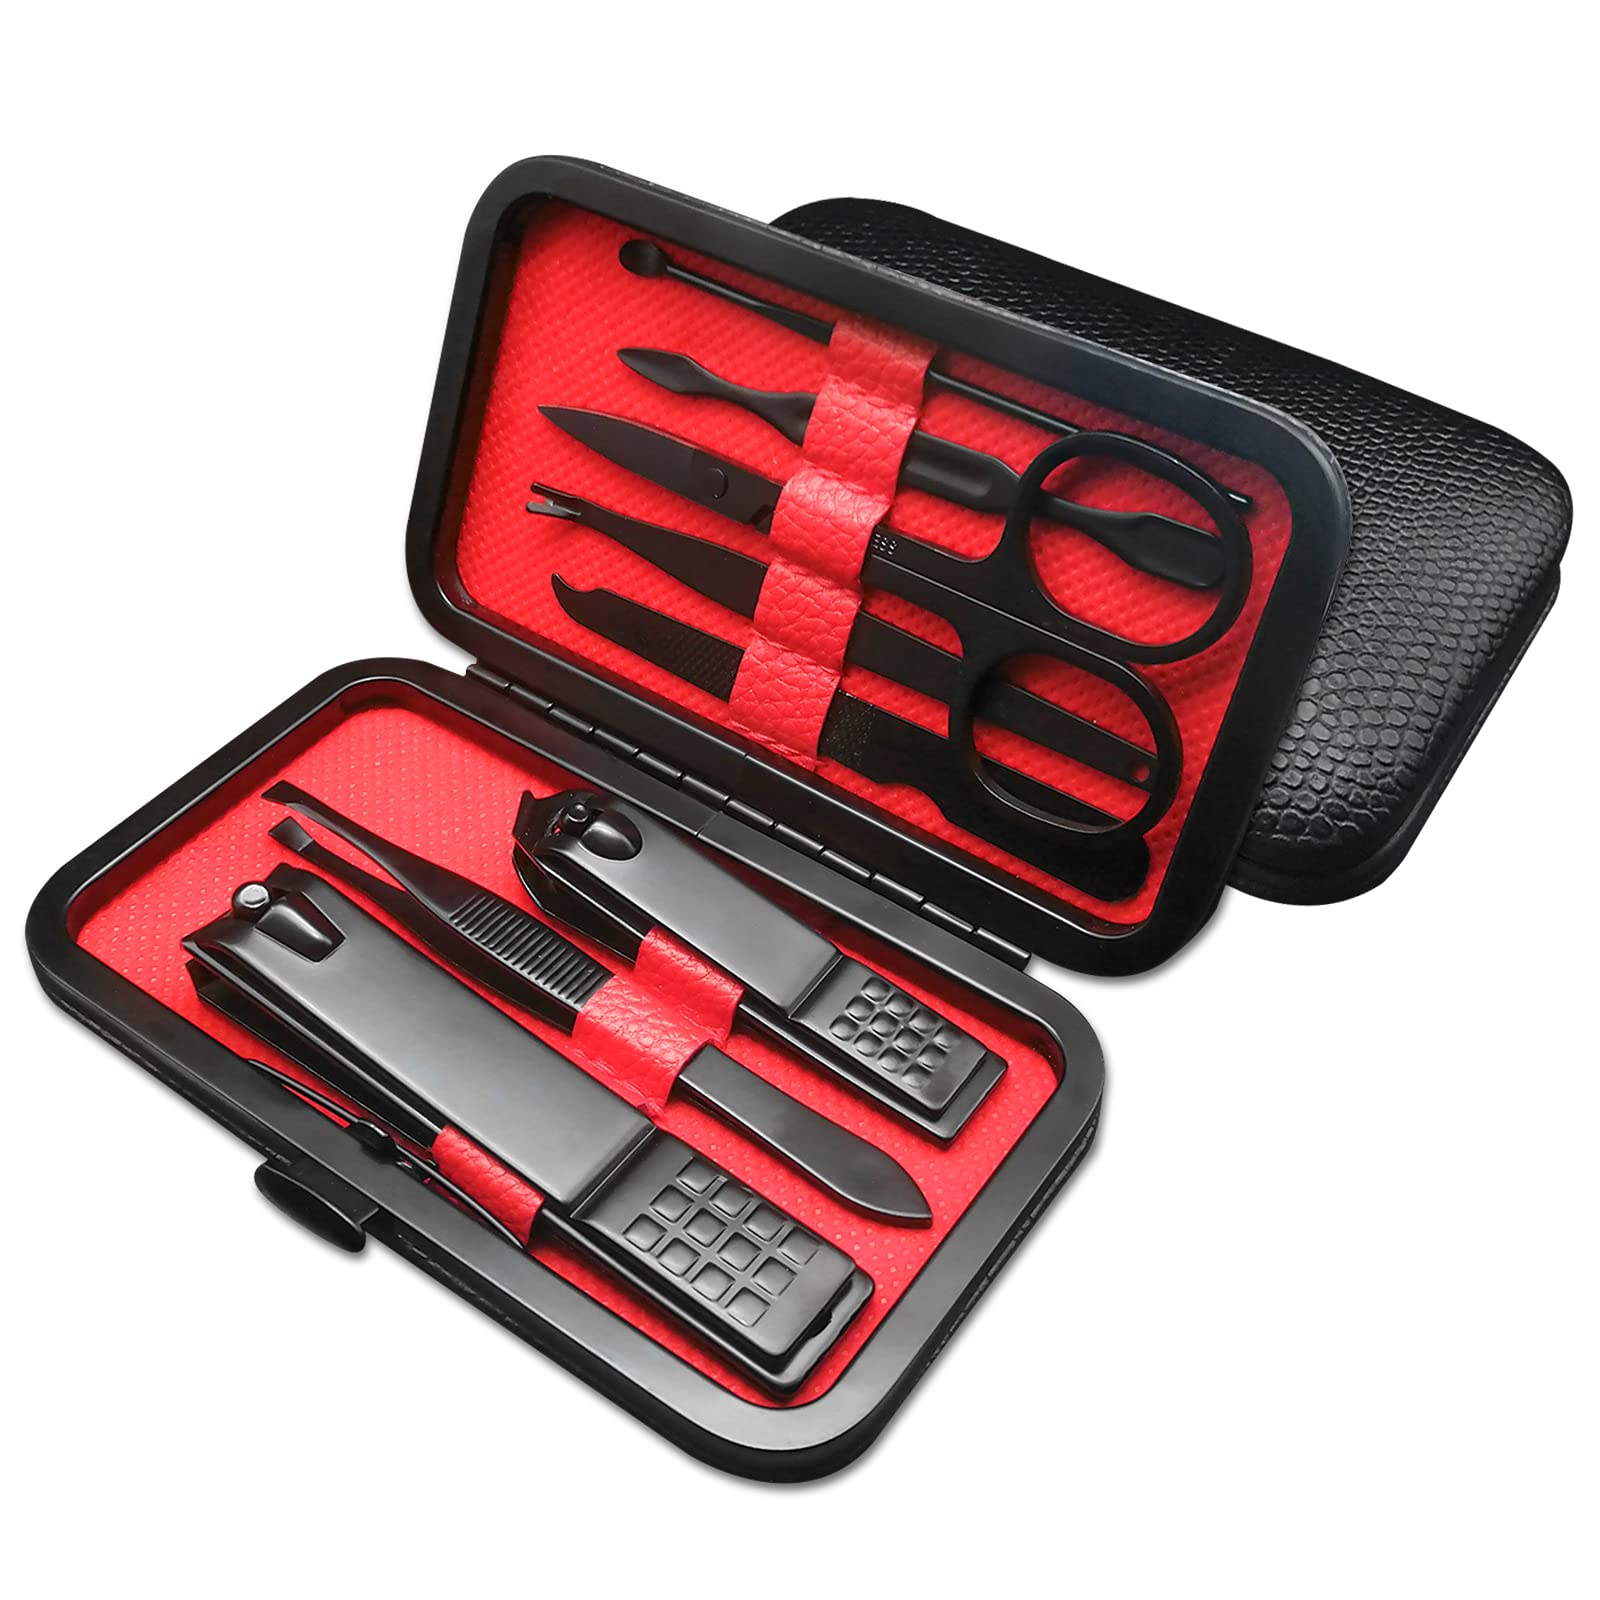 Manicure Set Manicure Pedicure Kit Nail Grooming Kit for Men, 7 in 1 Travel  Nail